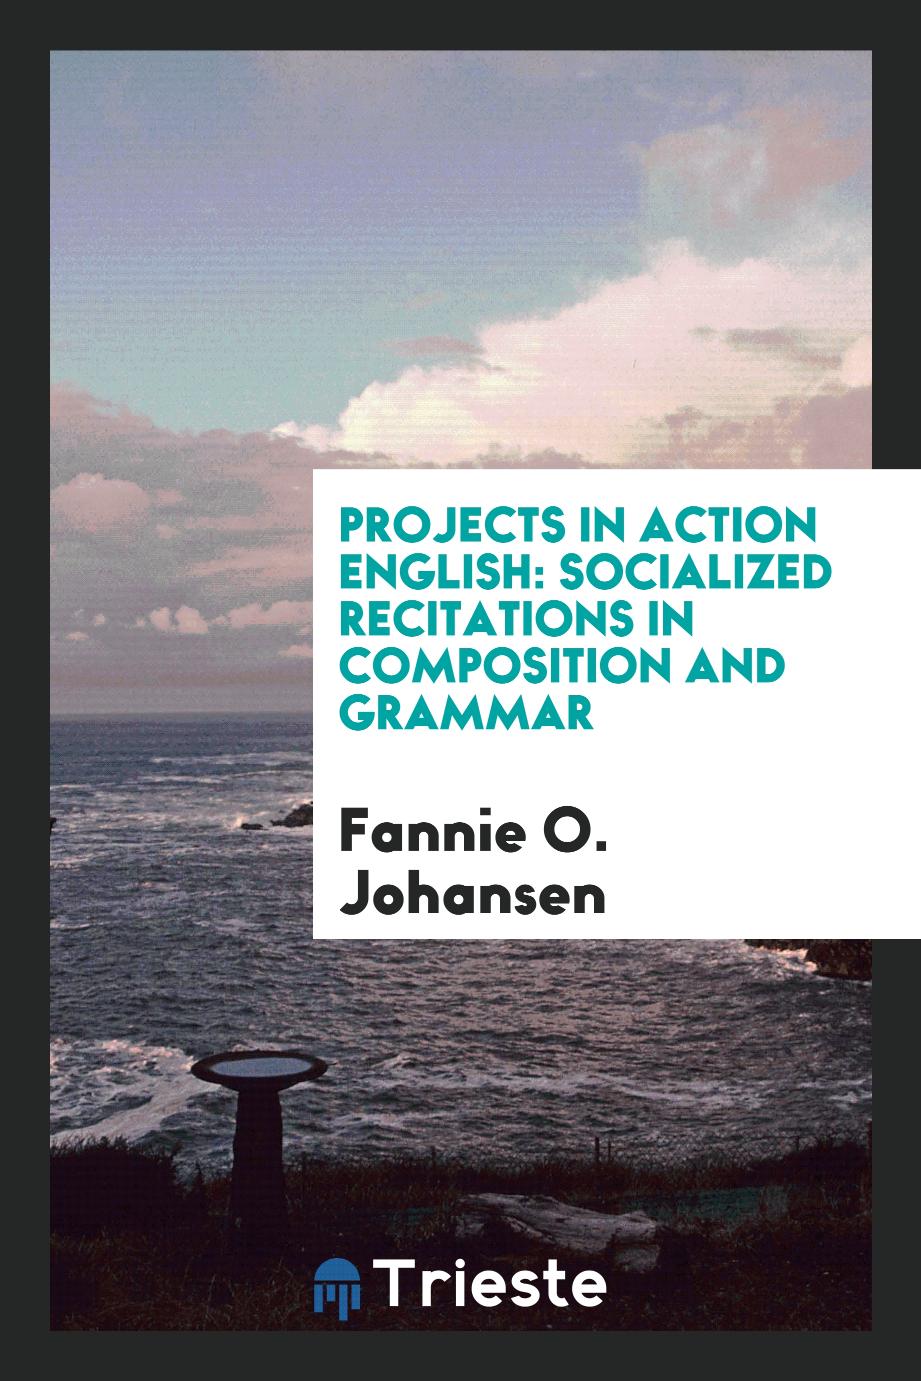 Projects in action English: socialized recitations in composition and grammar